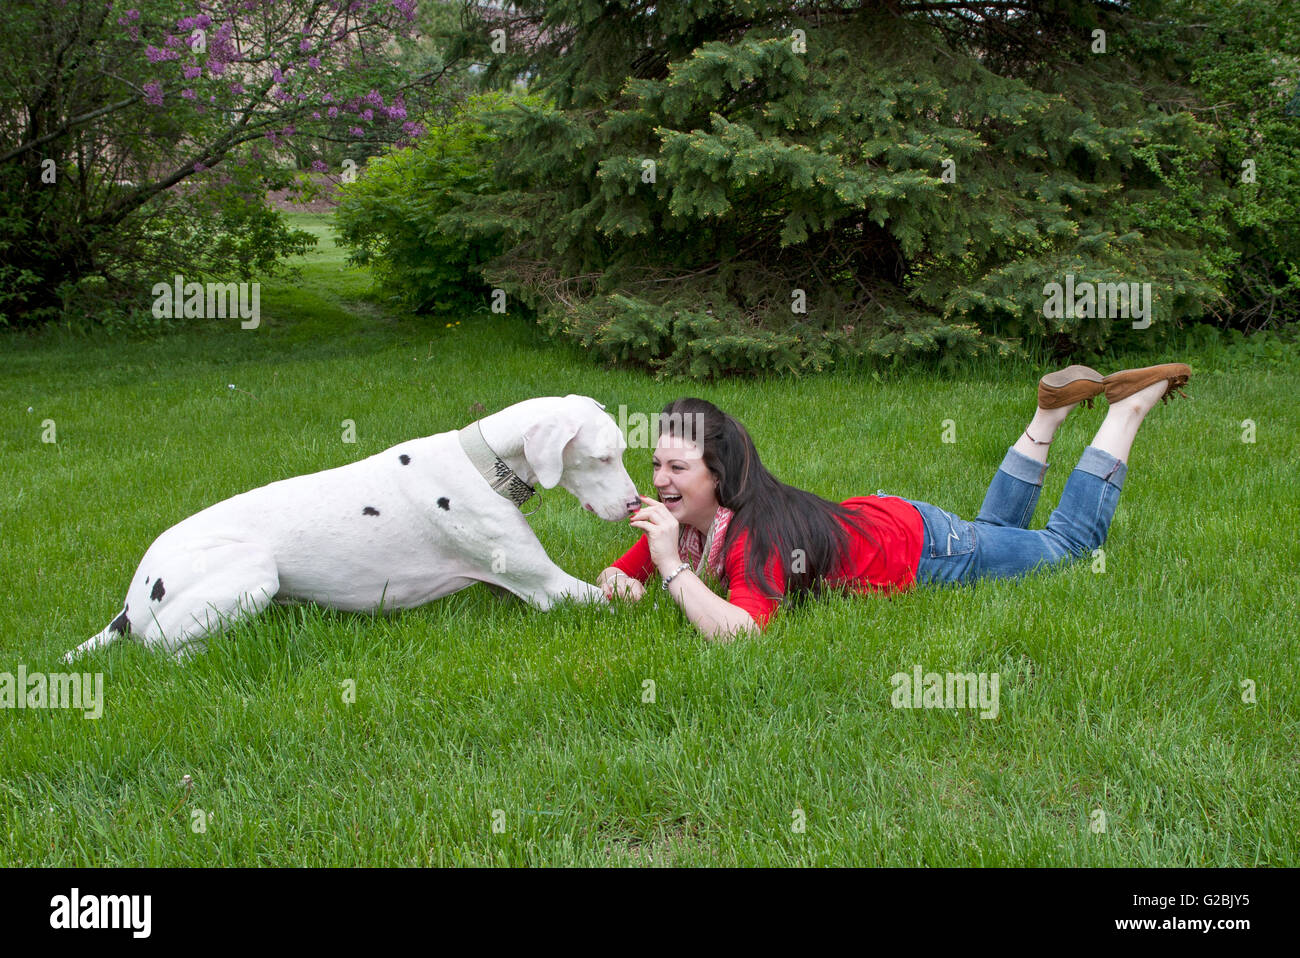 Woman in red laughs as she bonds with big dog Stock Photo